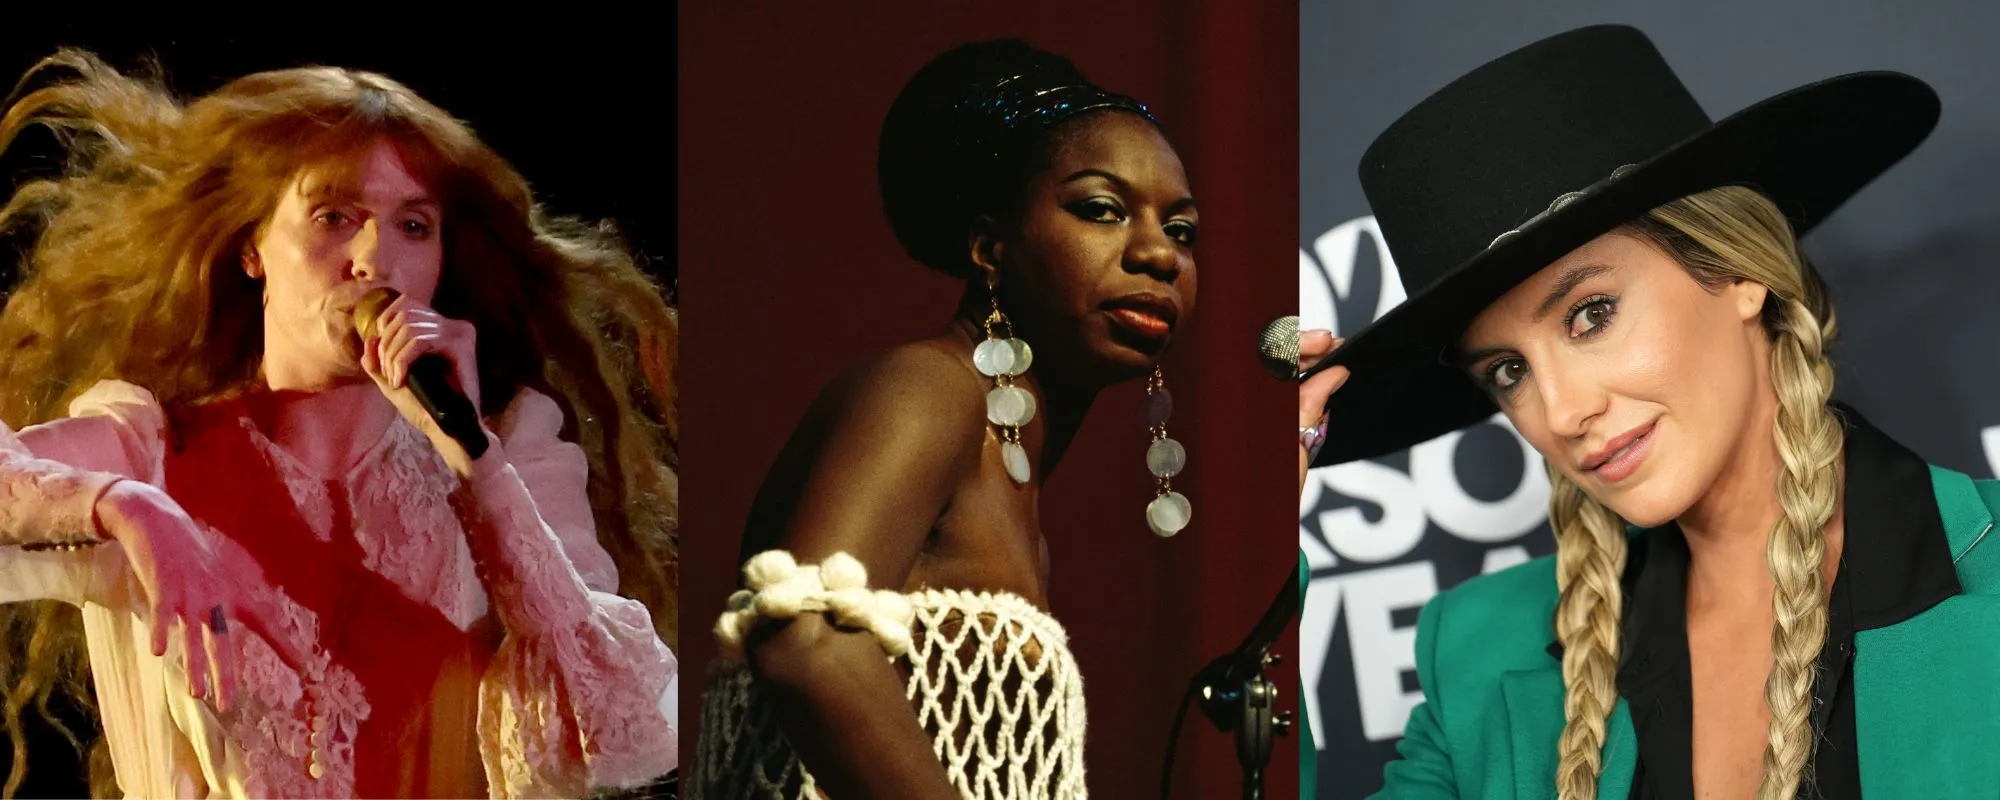 International Women’s Day: 5 Amazing Female Musicians to Listen to Today, Plus Many More